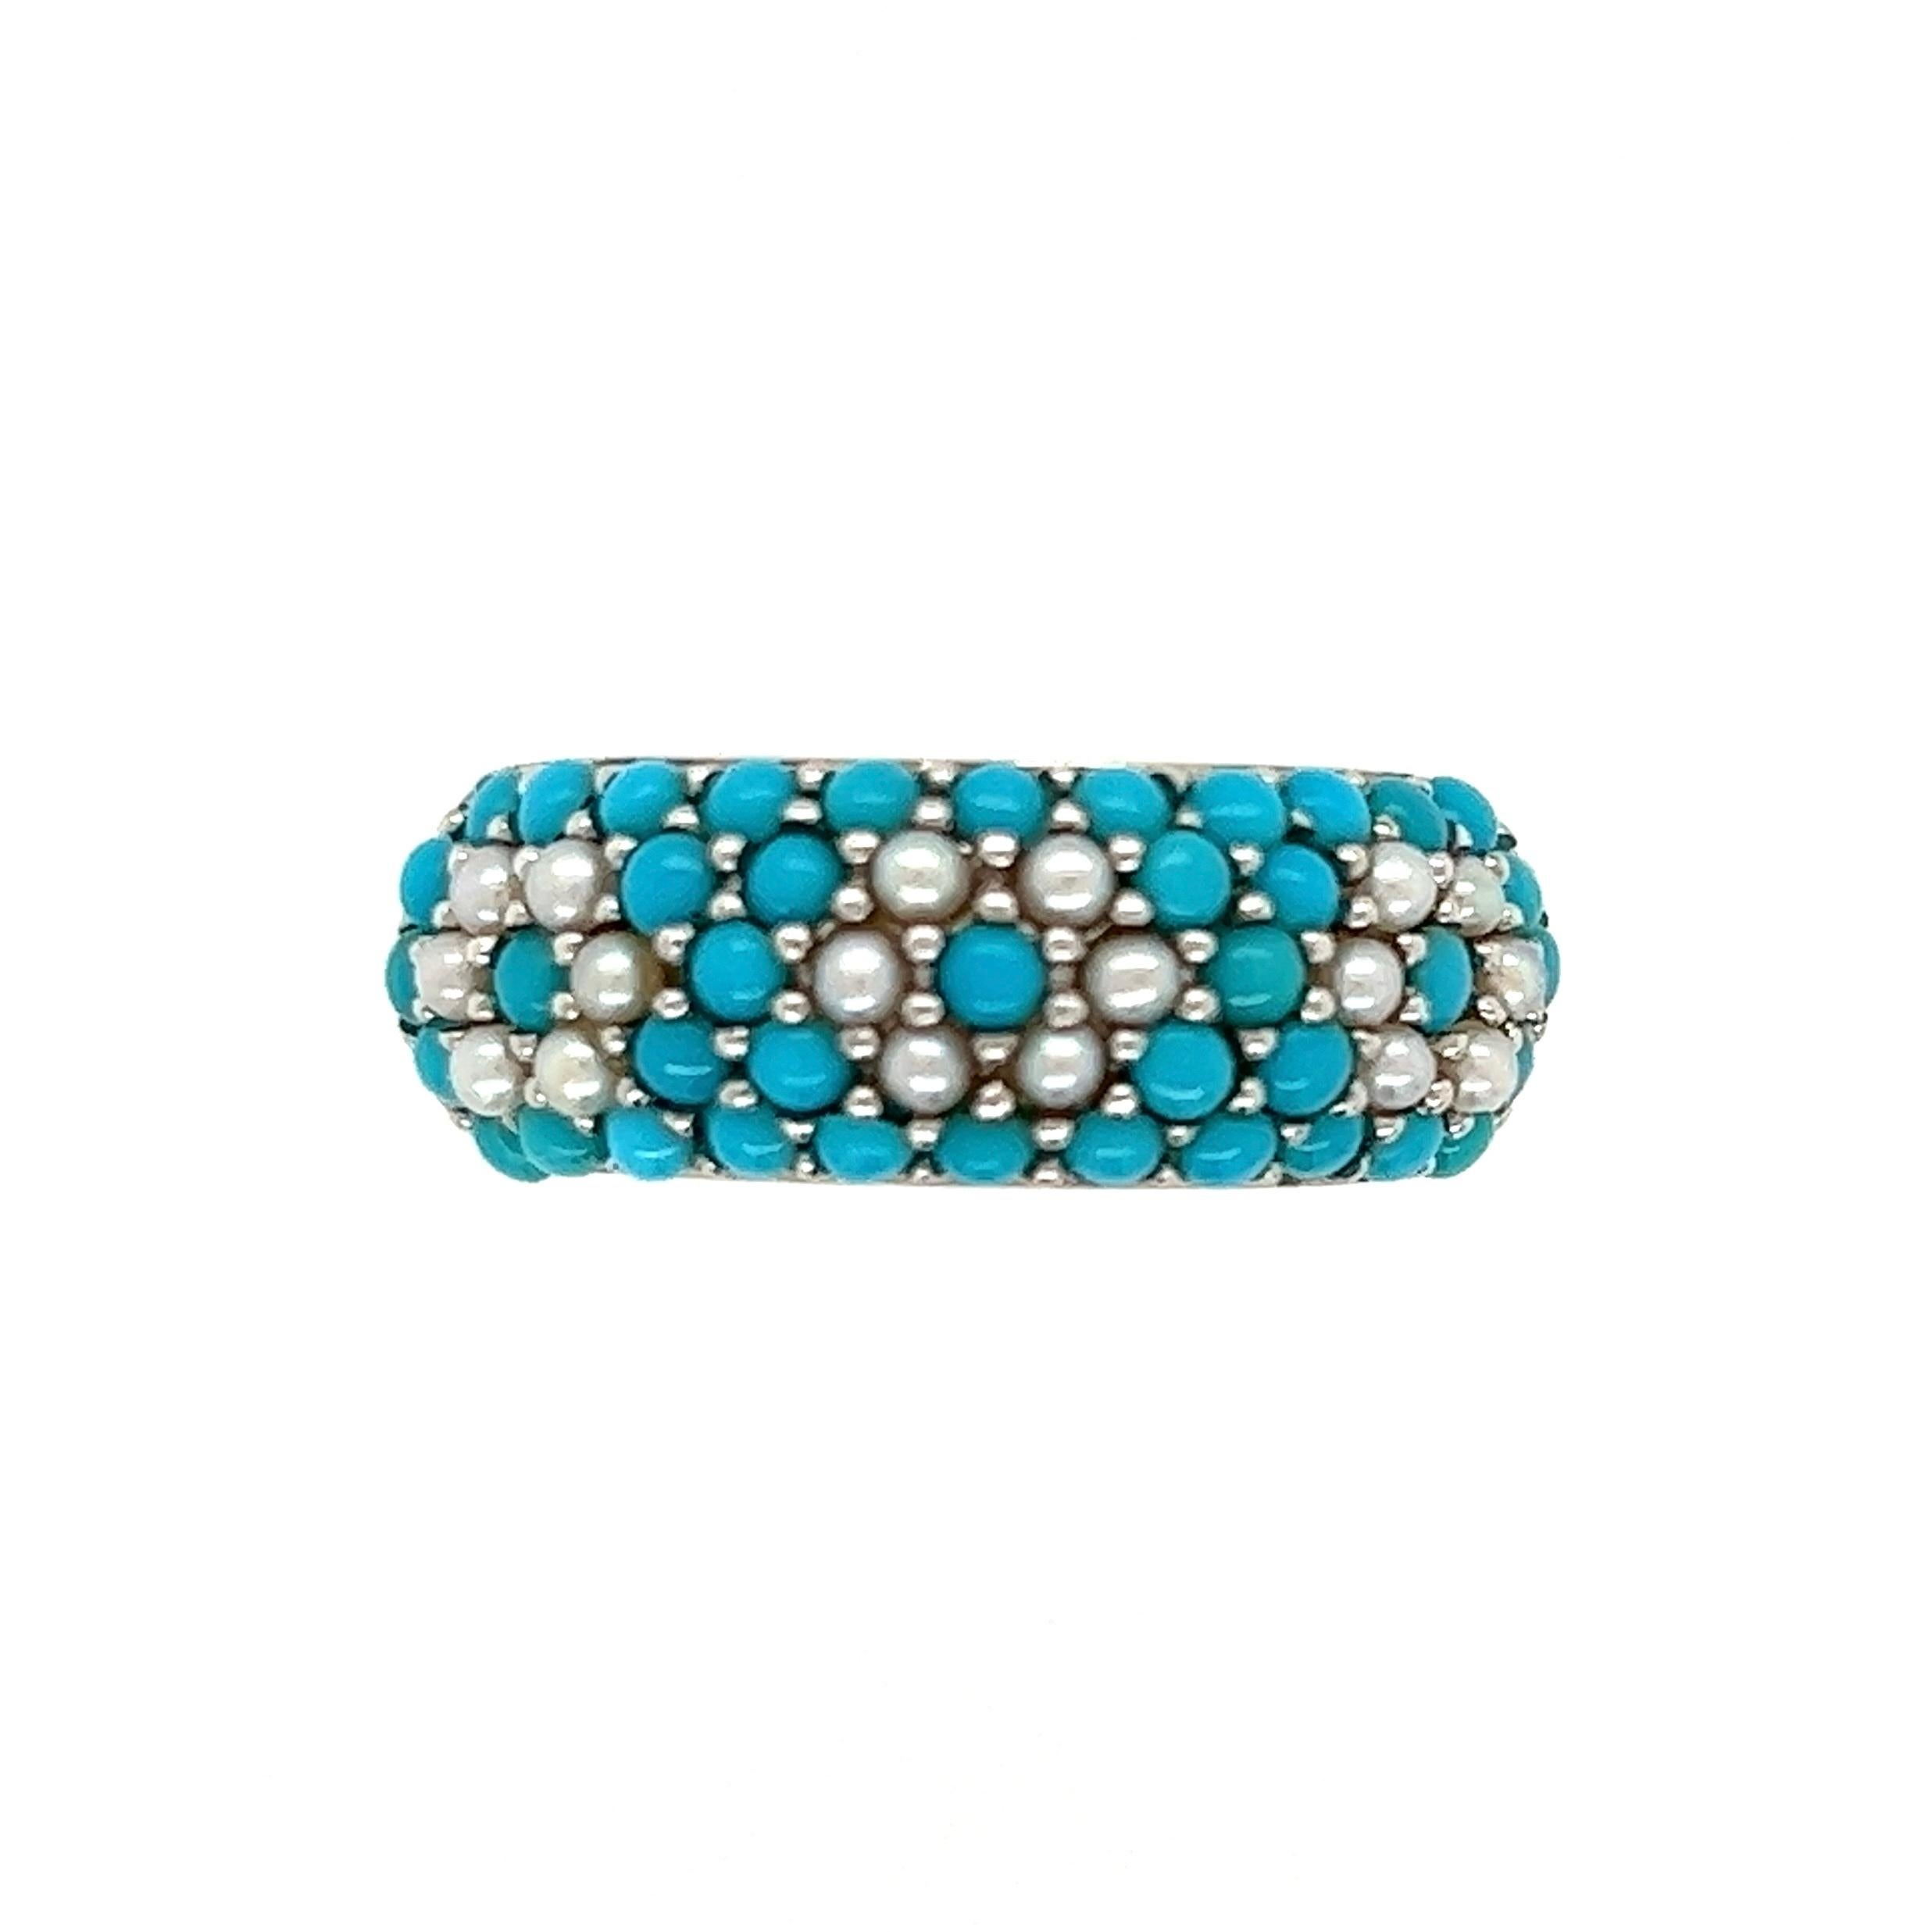 Simply Beautiful! Turquoise and Seed Pearl 5 Row Gold Band Ring.  Hand set with Turquoise and Seed Pearls. Hand crafted in 18 Karat White Gold. Measuring approx. 0.88” l x 0.90” w x 0.31” h. Ring size 7, we offer ring resizing. More Beautiful in